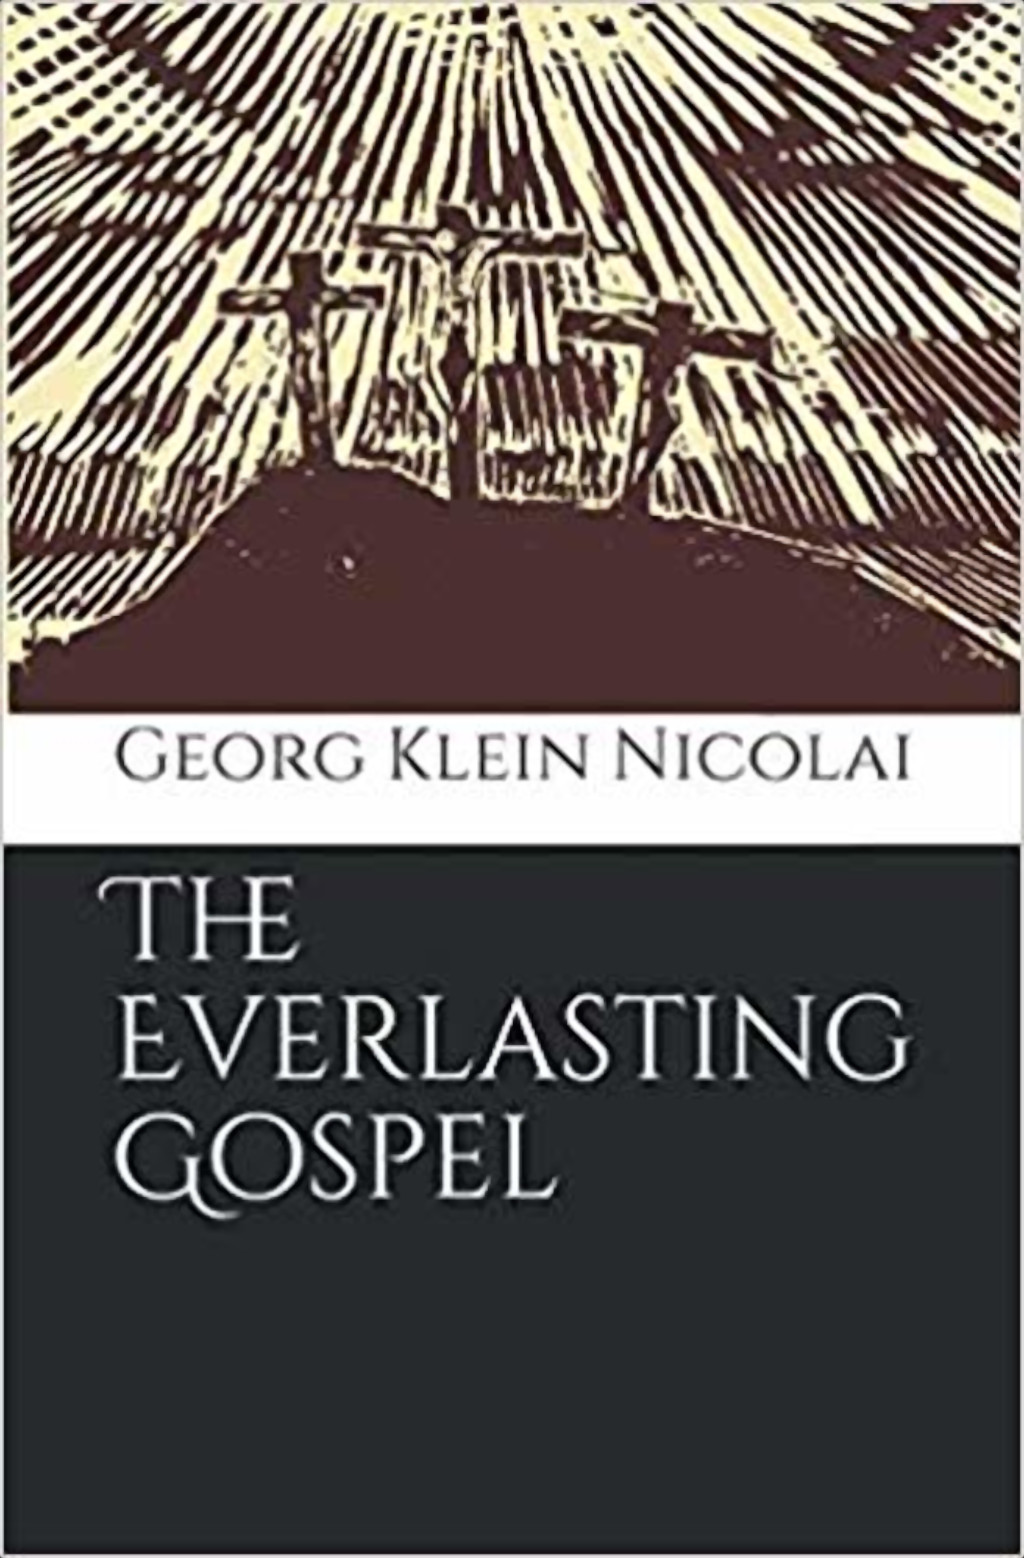 Available now as paperback! The Everlasting Gospel by Georg Klein-Nicolai